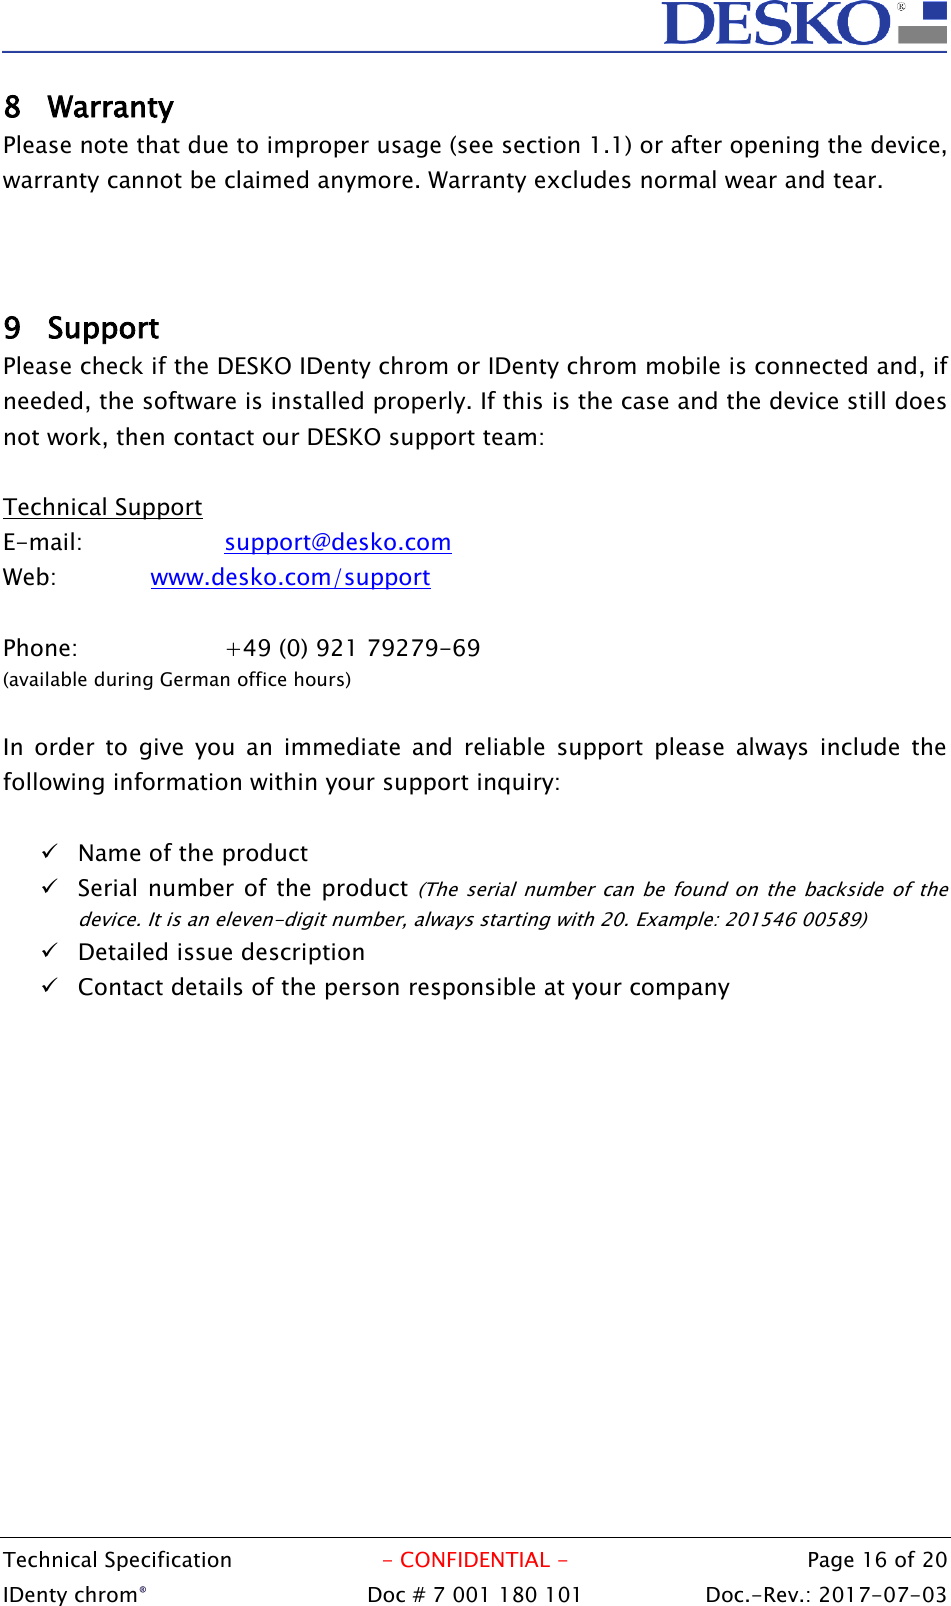  Technical Specification  - CONFIDENTIAL -  Page 16 of 20 IDenty chrom®  Doc # 7 001 180 101   Doc.-Rev.: 2017-07-03   8 Warranty  Please note that due to improper usage (see section 1.1) or after opening the device, warranty cannot be claimed anymore. Warranty excludes normal wear and tear.    9 Support Please check if the DESKO IDenty chrom or IDenty chrom mobile is connected and, if needed, the software is installed properly. If this is the case and the device still does not work, then contact our DESKO support team:  Technical Support E-mail:    support@desko.com  Web:    www.desko.com/support   Phone:    +49 (0) 921 79279-69 (available during German office hours)  In  order  to  give  you  an  immediate  and  reliable  support  please  always  include  the following information within your support inquiry:   Name of the product  Serial number of the product  (The  serial  number  can  be  found  on  the  backside  of  the device. It is an eleven-digit number, always starting with 20. Example: 201546 00589)  Detailed issue description  Contact details of the person responsible at your company  